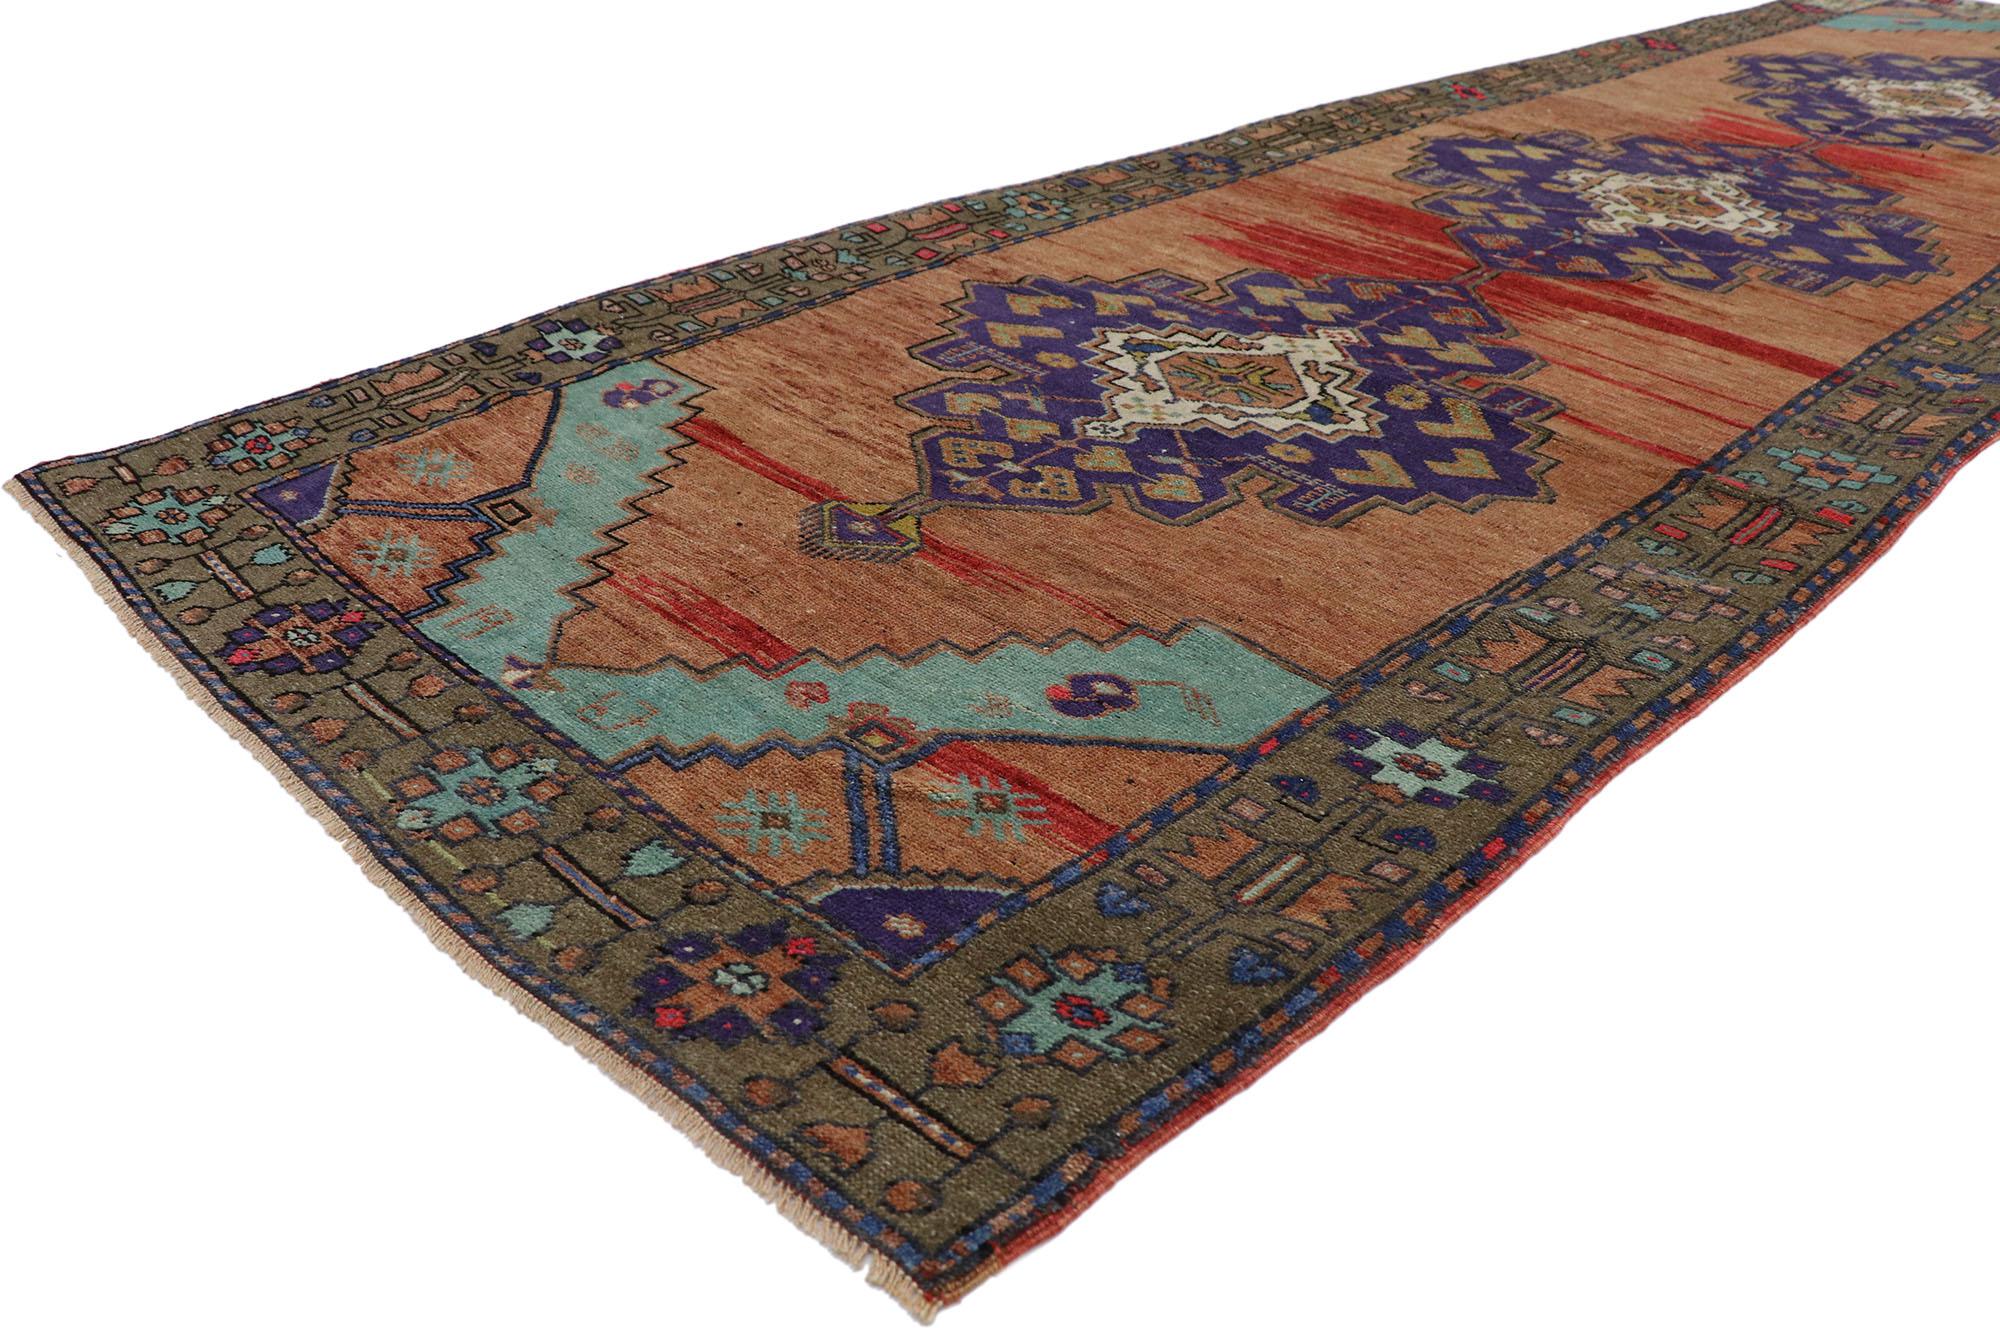 53616 vintage Turkish Oushak Runner 03'06 x 12'00. Full of tiny details and a bold expressive design combined with vibrant colors and tribal style, this hand-knotted wool vintage Turkish Oushak hallway runner is a captivating vision of woven beauty.